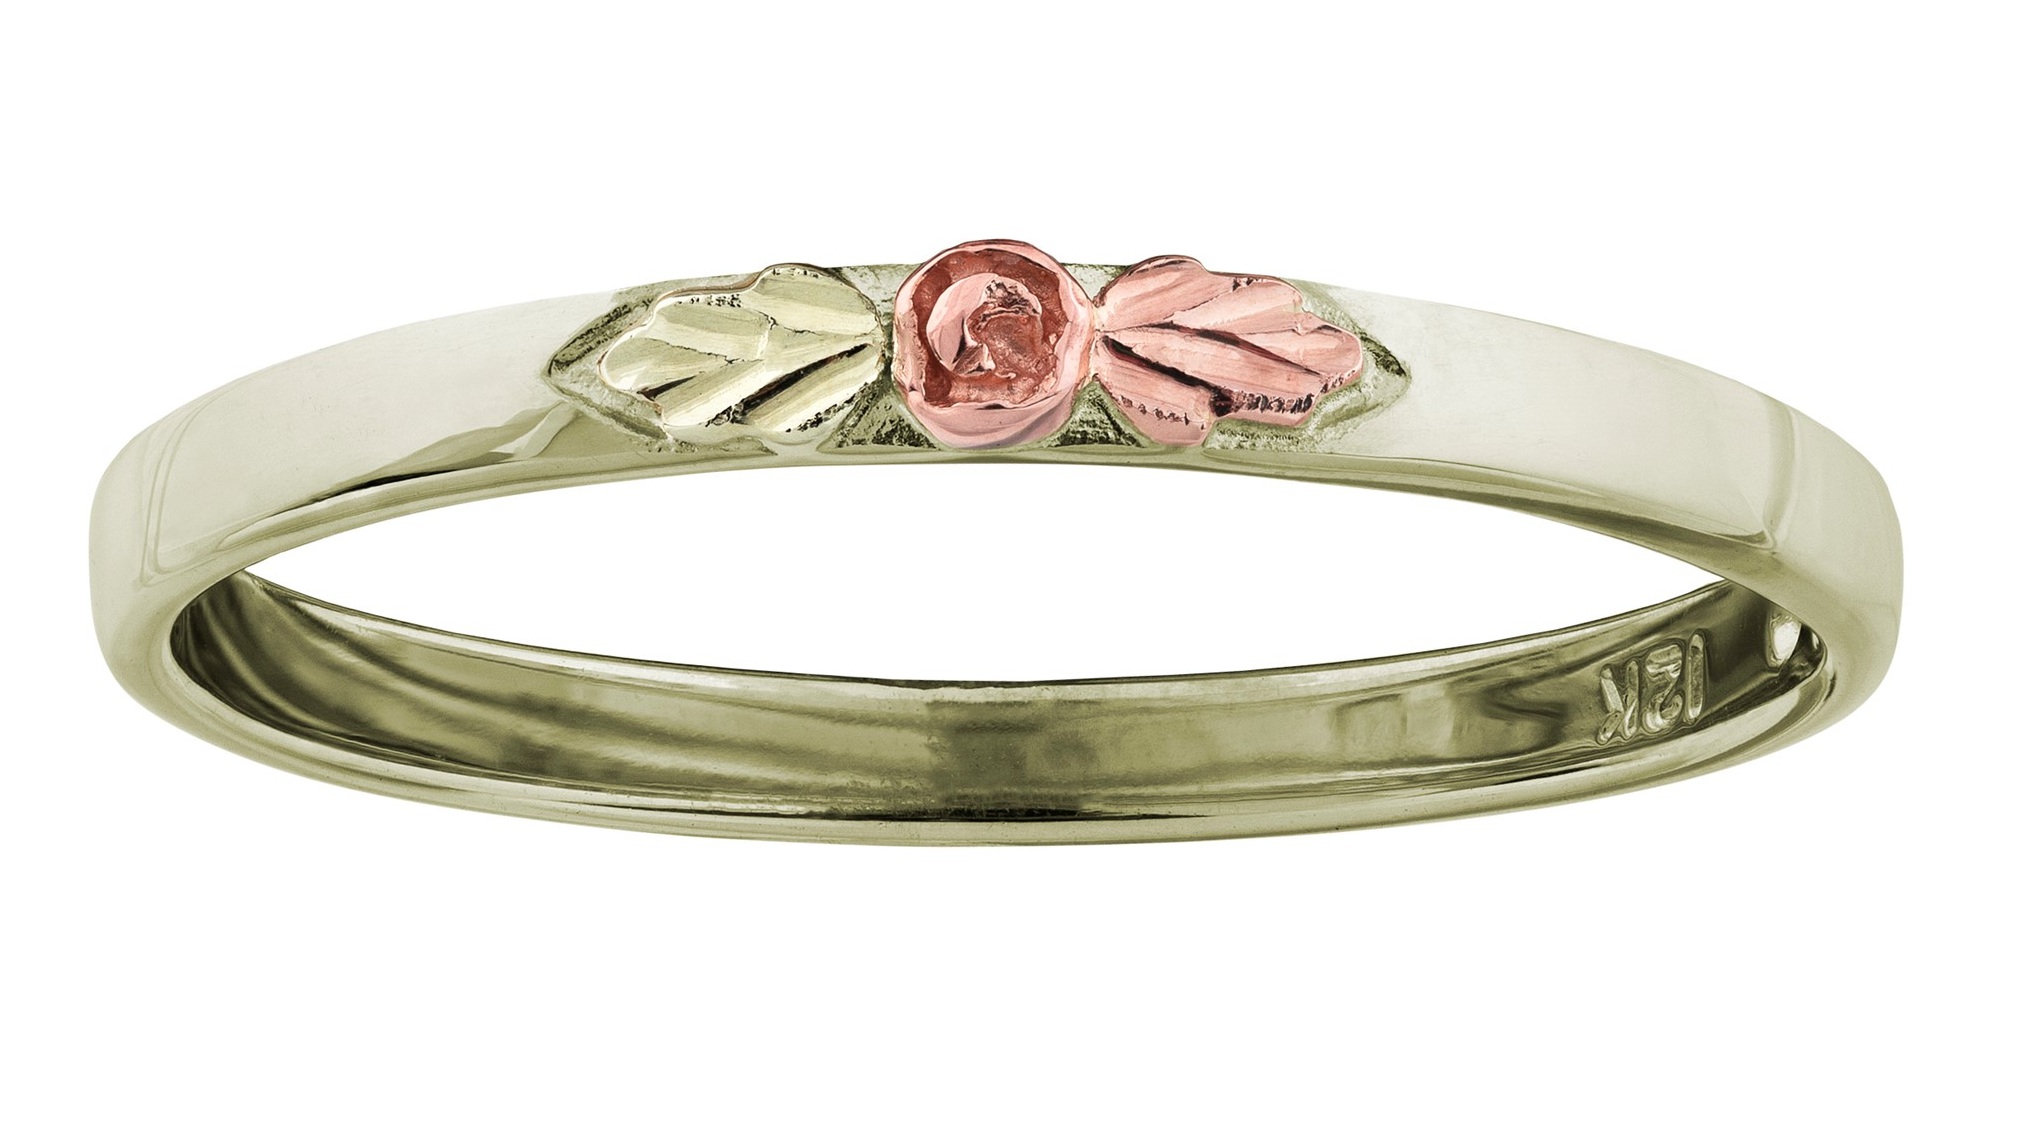 Women's Stackable Ring, Sterling Silver, 10k Rose and 12k Green Gold Black Hills Gold